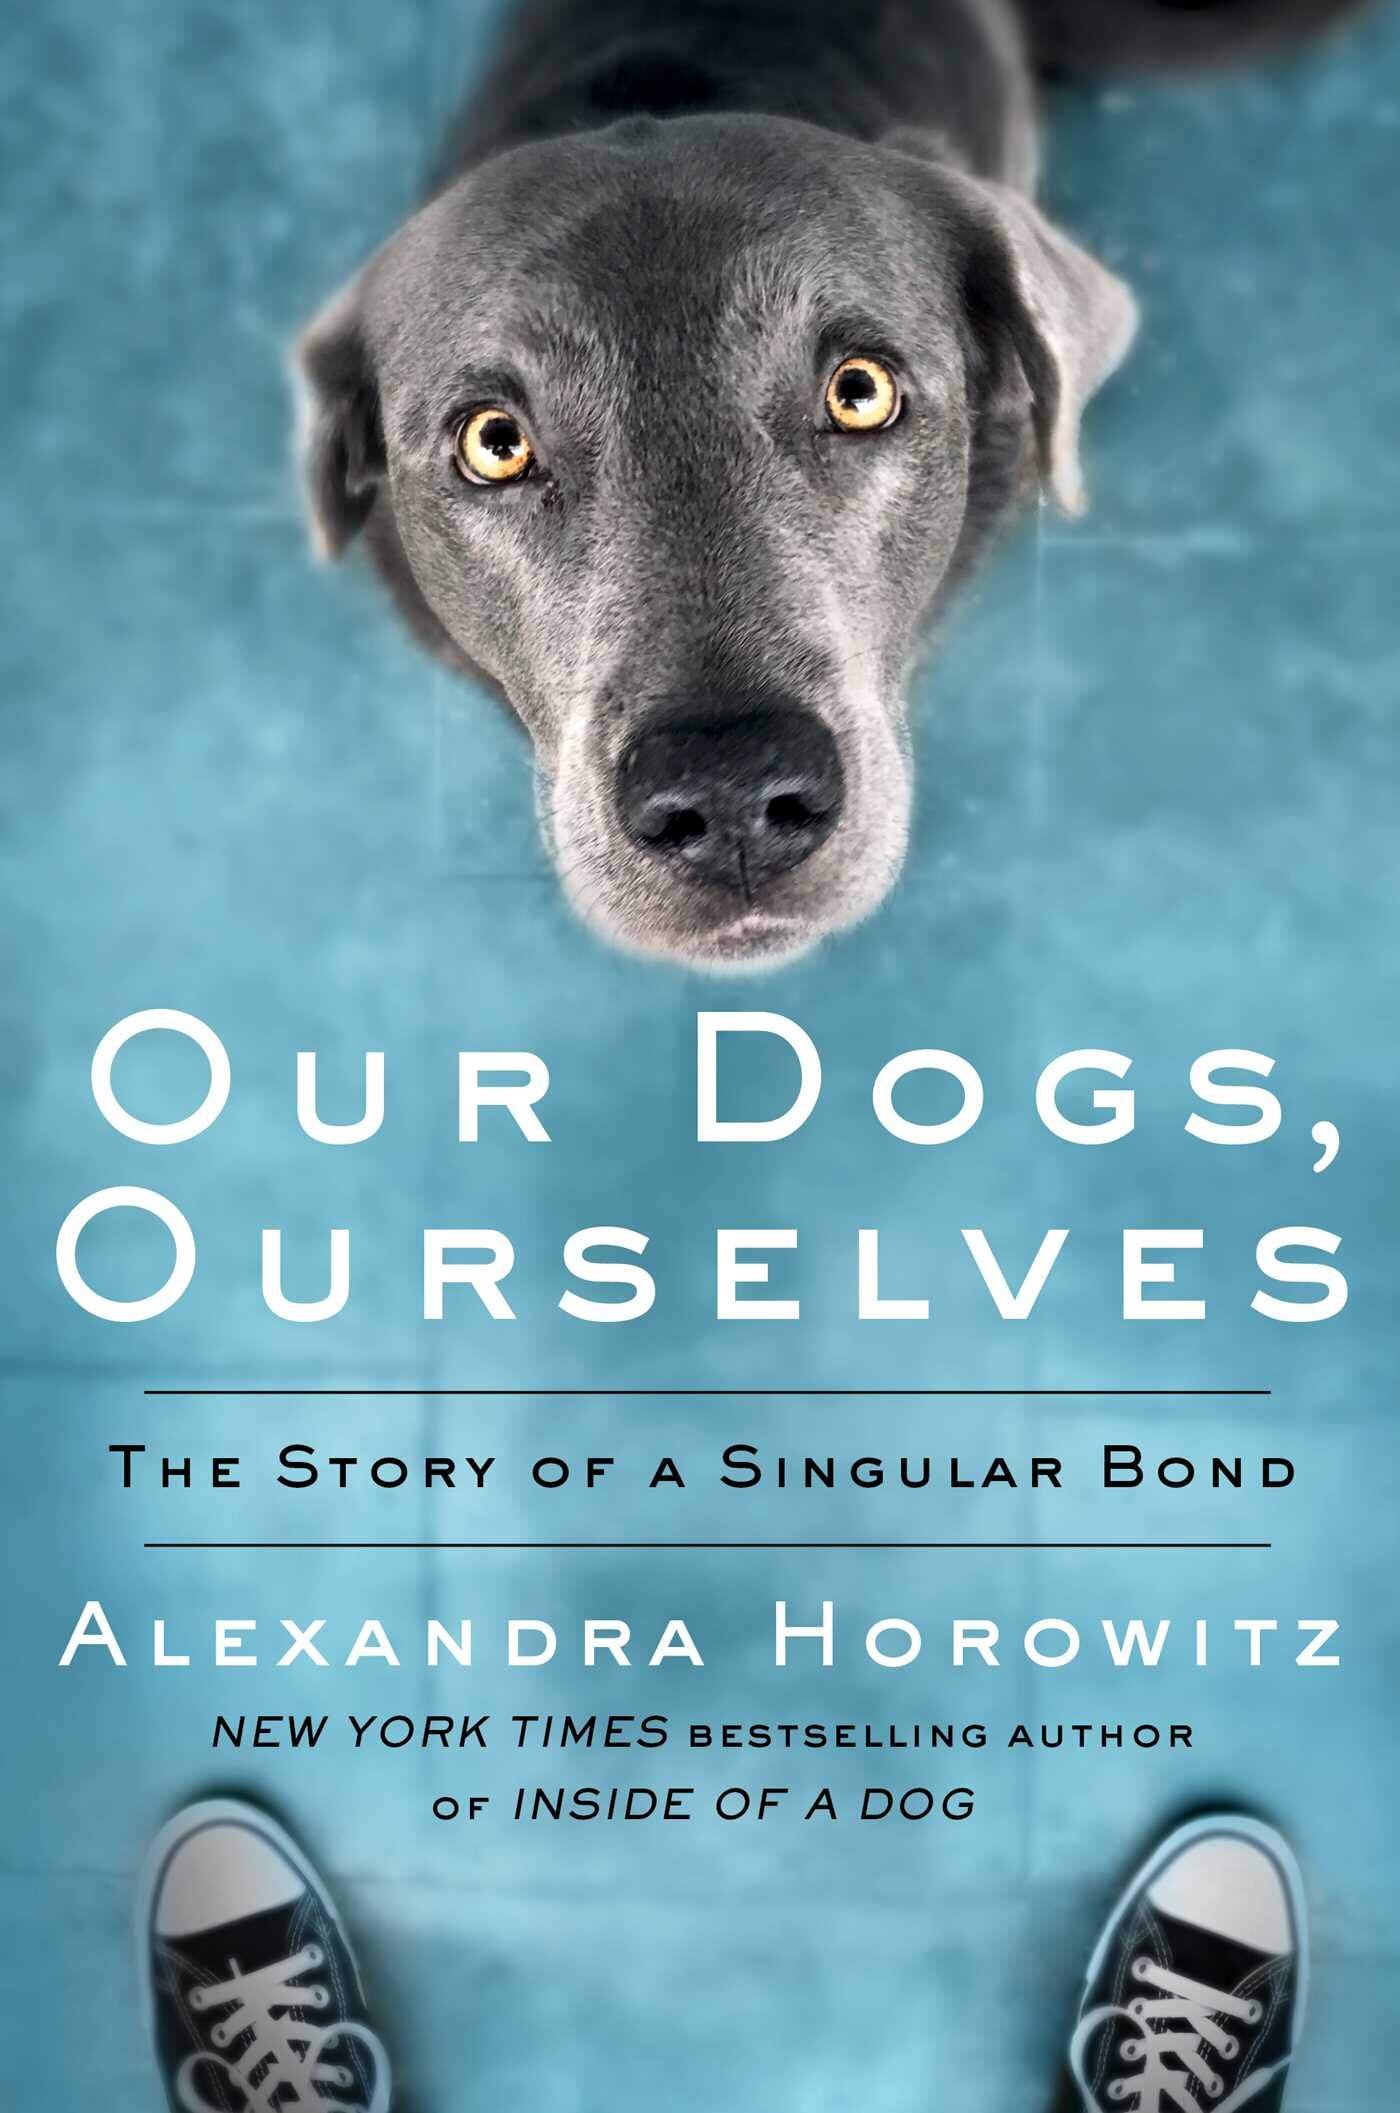 Nature Out Dogs, Ourselves The Story of Singular Bond by Alexandra Horowitz.jpg